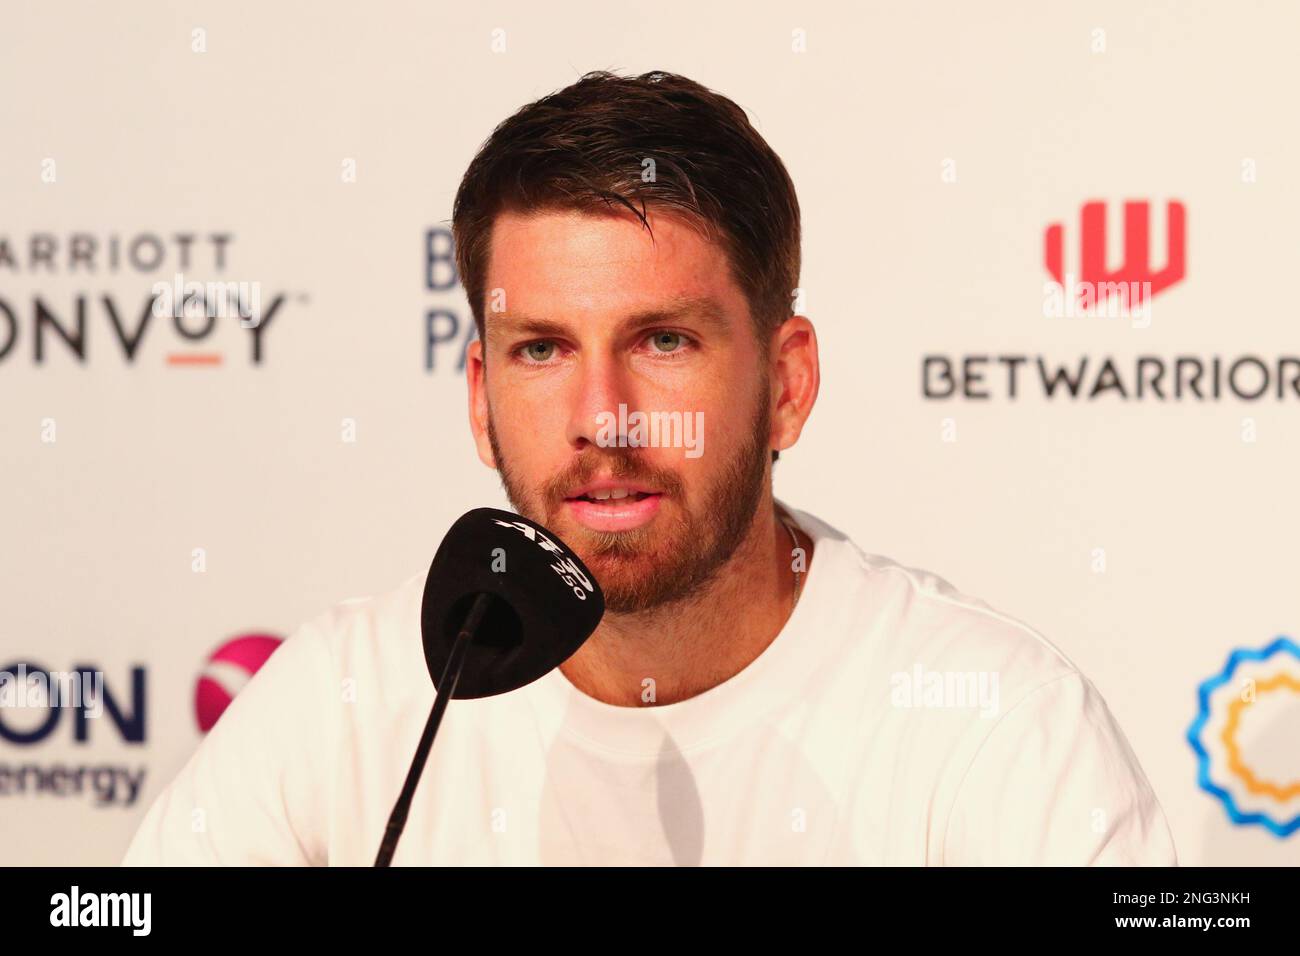 Buenos Aires, Argentina, 17th Feb 2023, Cameron Norrie answers questions during the press conference after his victory over Tomas Etcheverry to advance to the semifinals of the Argentina Open. Credit: Néstor J. Beremblum/Alamy Live News Stock Photo